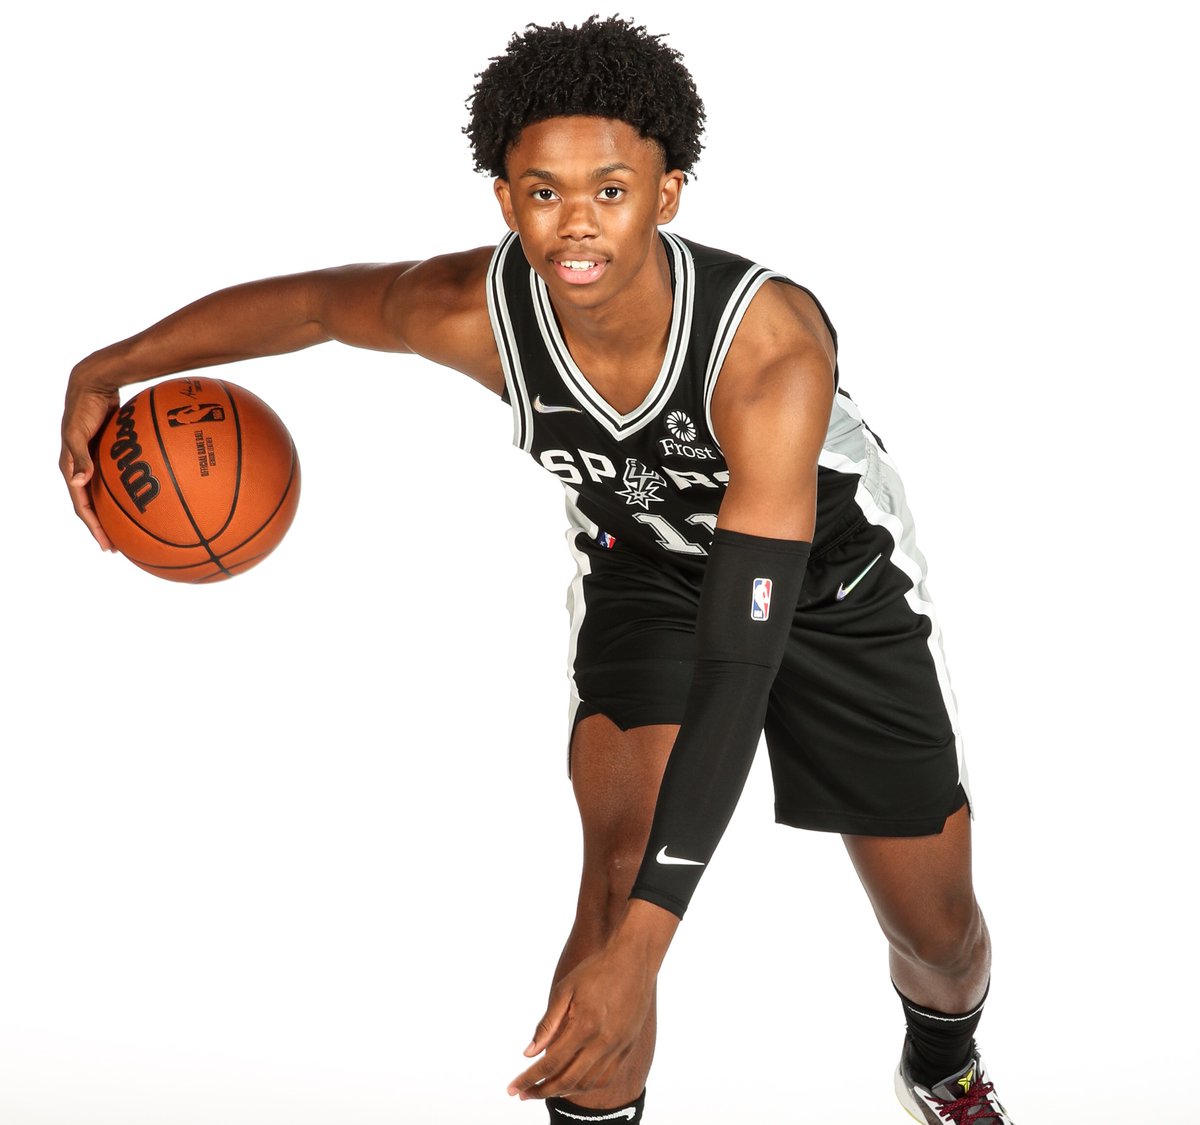 RT @NBA: Join us in wishing @JoshuaPrimo4 of the @spurs a HAPPY 19th BIRTHDAY! #NBABDAY https://t.co/aQg47Qi3Q7